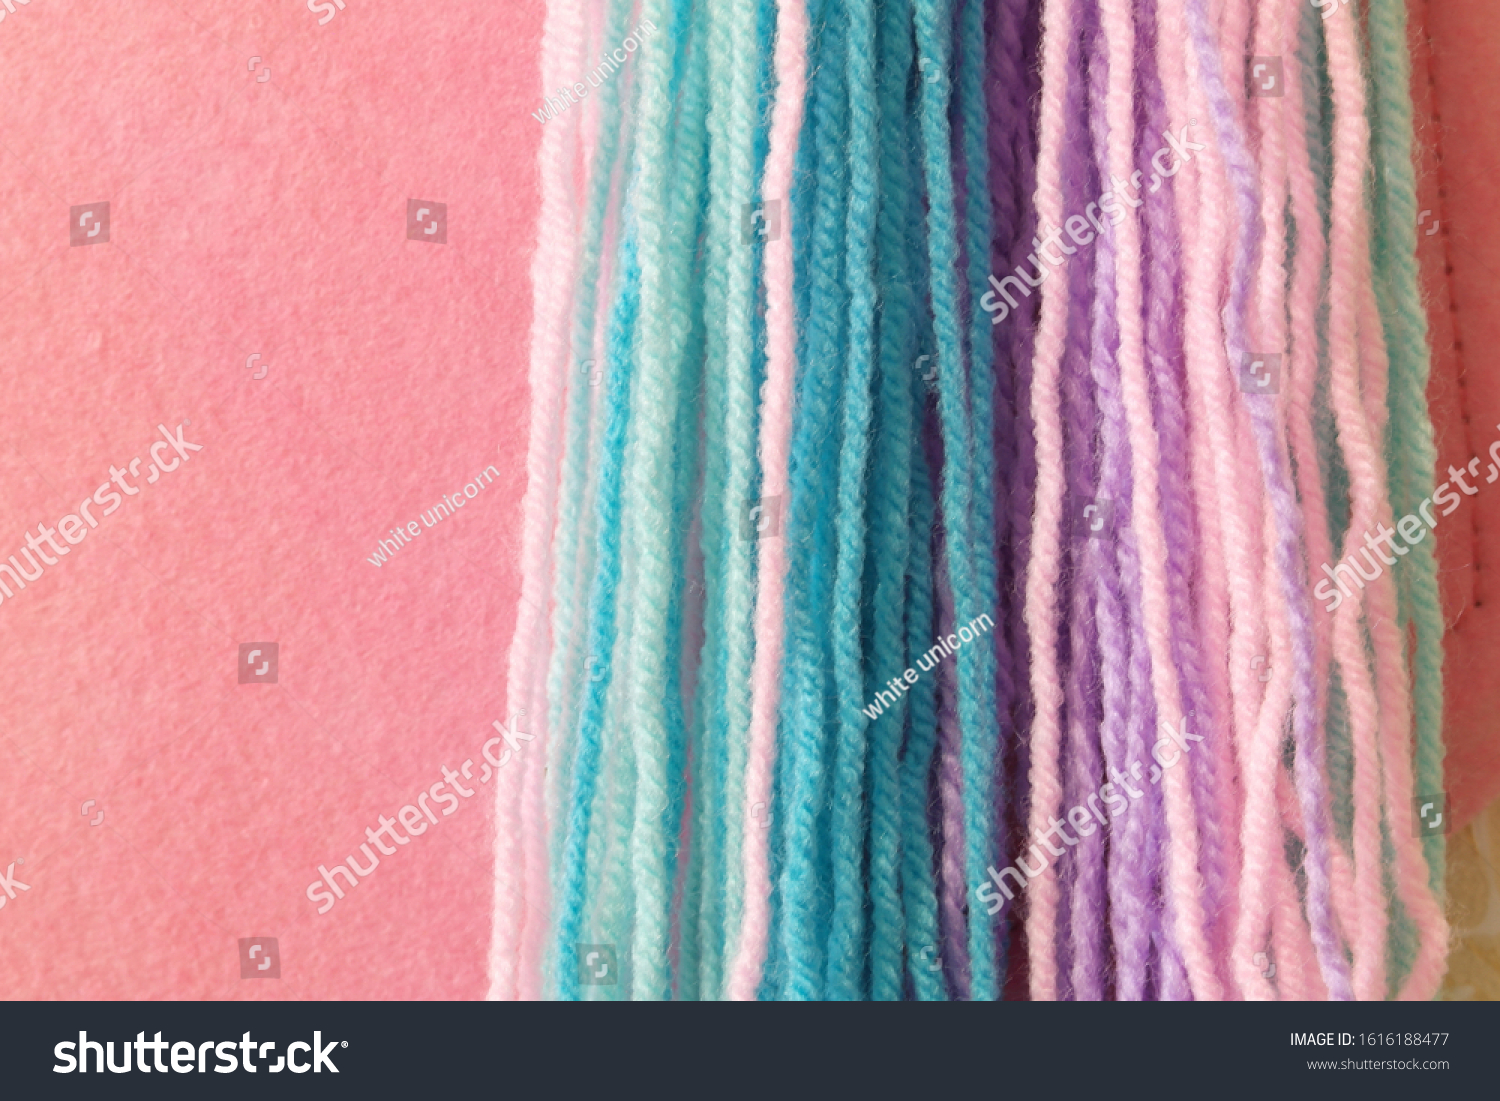 multi-colored yarn with threads and braided. Vibrant colors #1616188477